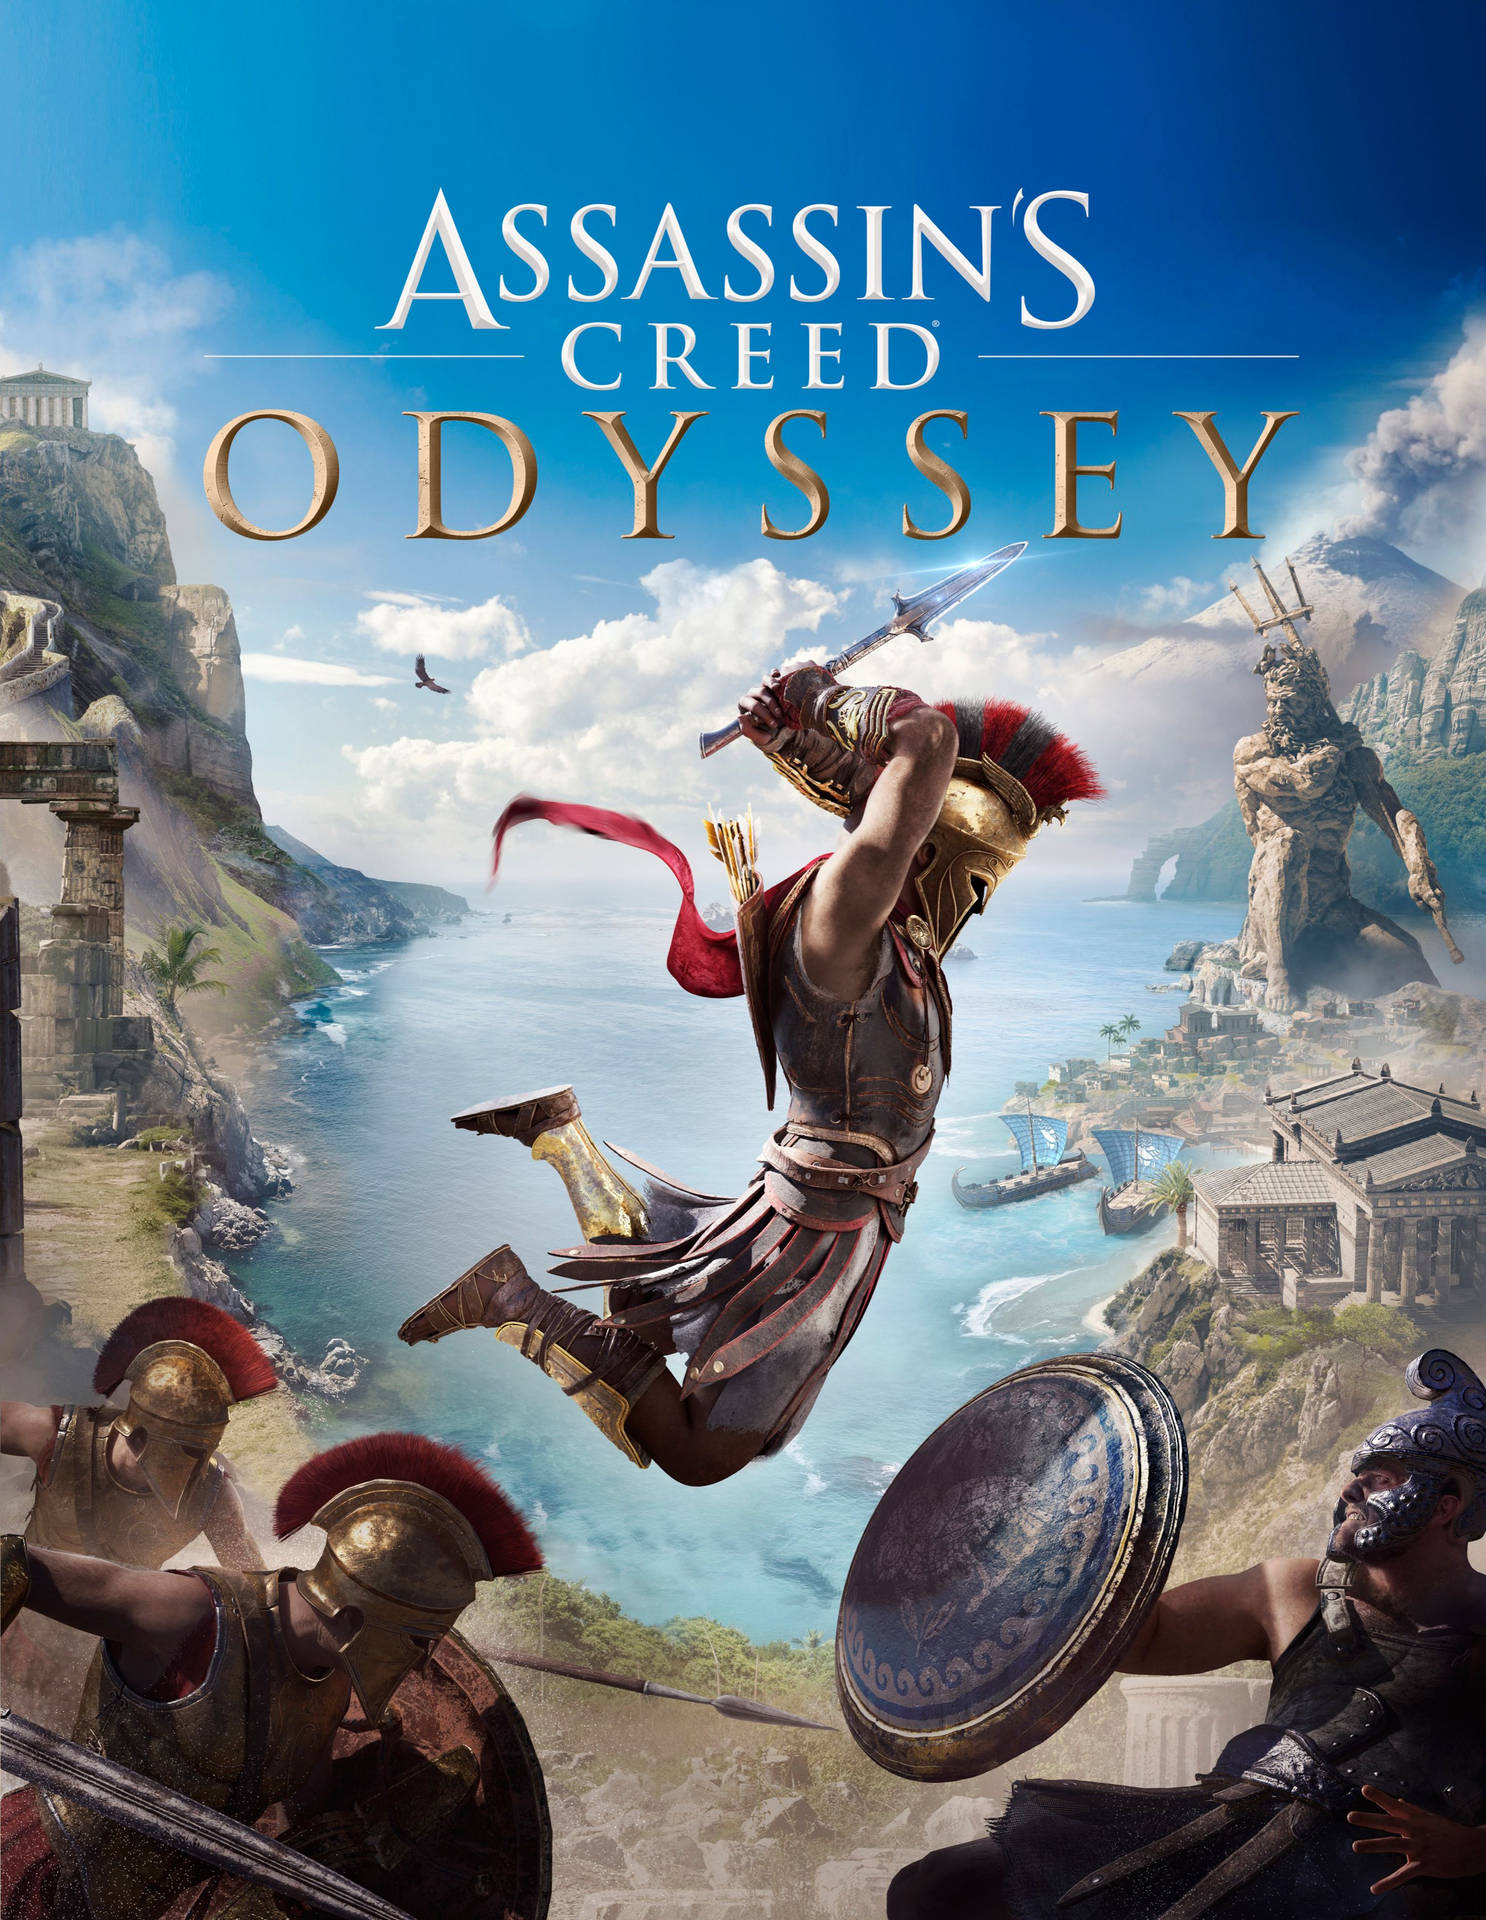 Assassin's Creed Odyssey Game Poster